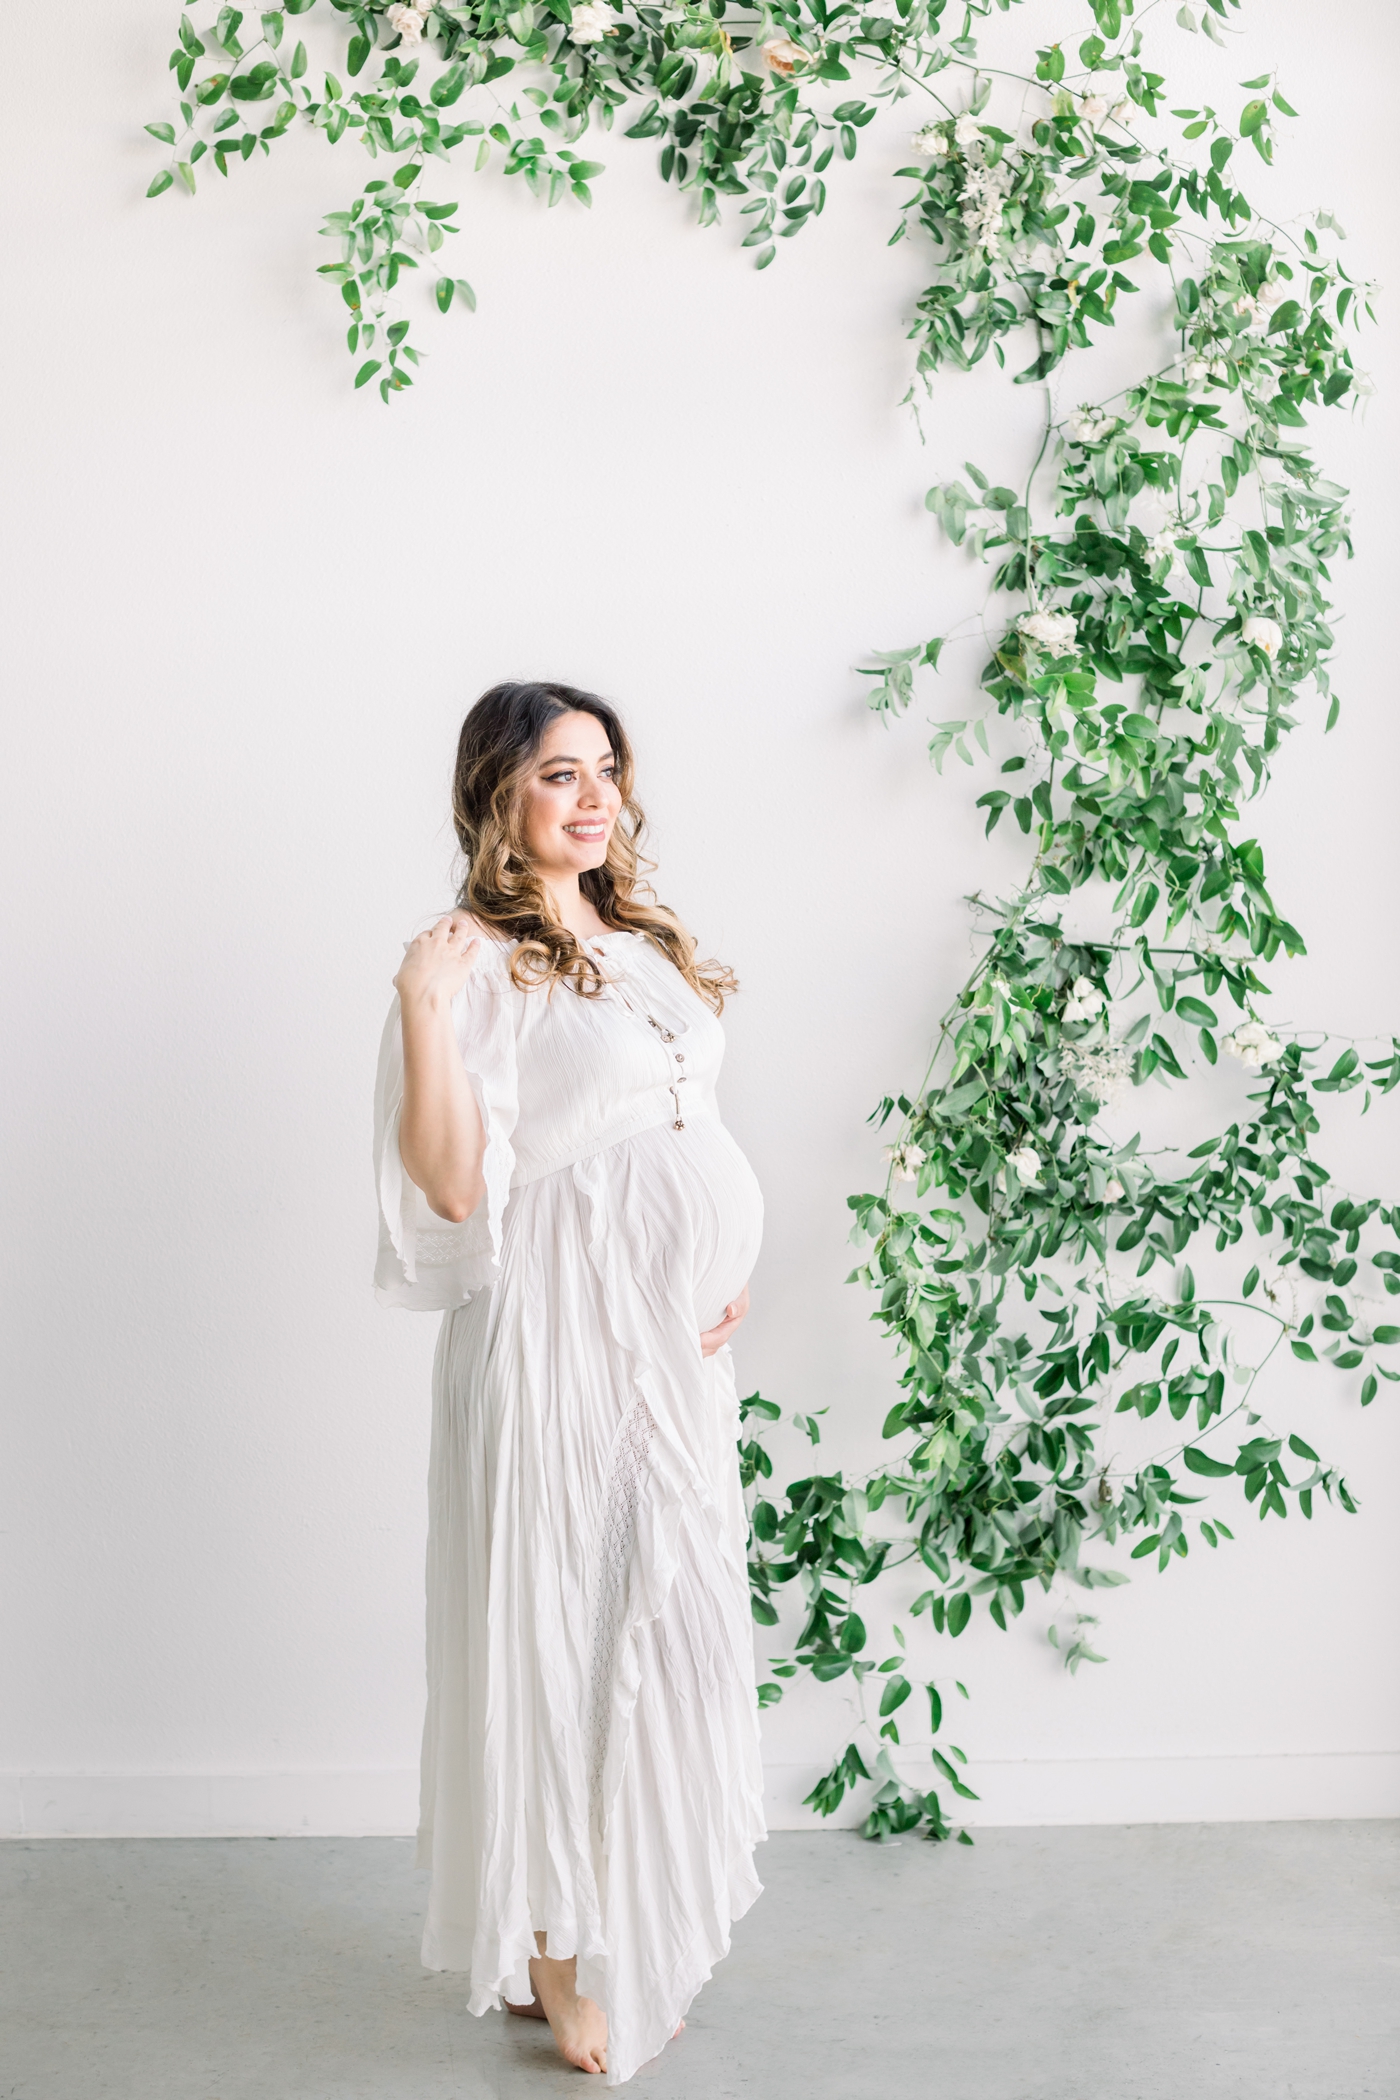 Pregnant mom wearing white maxi dress in studio with florals in the background. Photo by Sana Ahmed Photography.